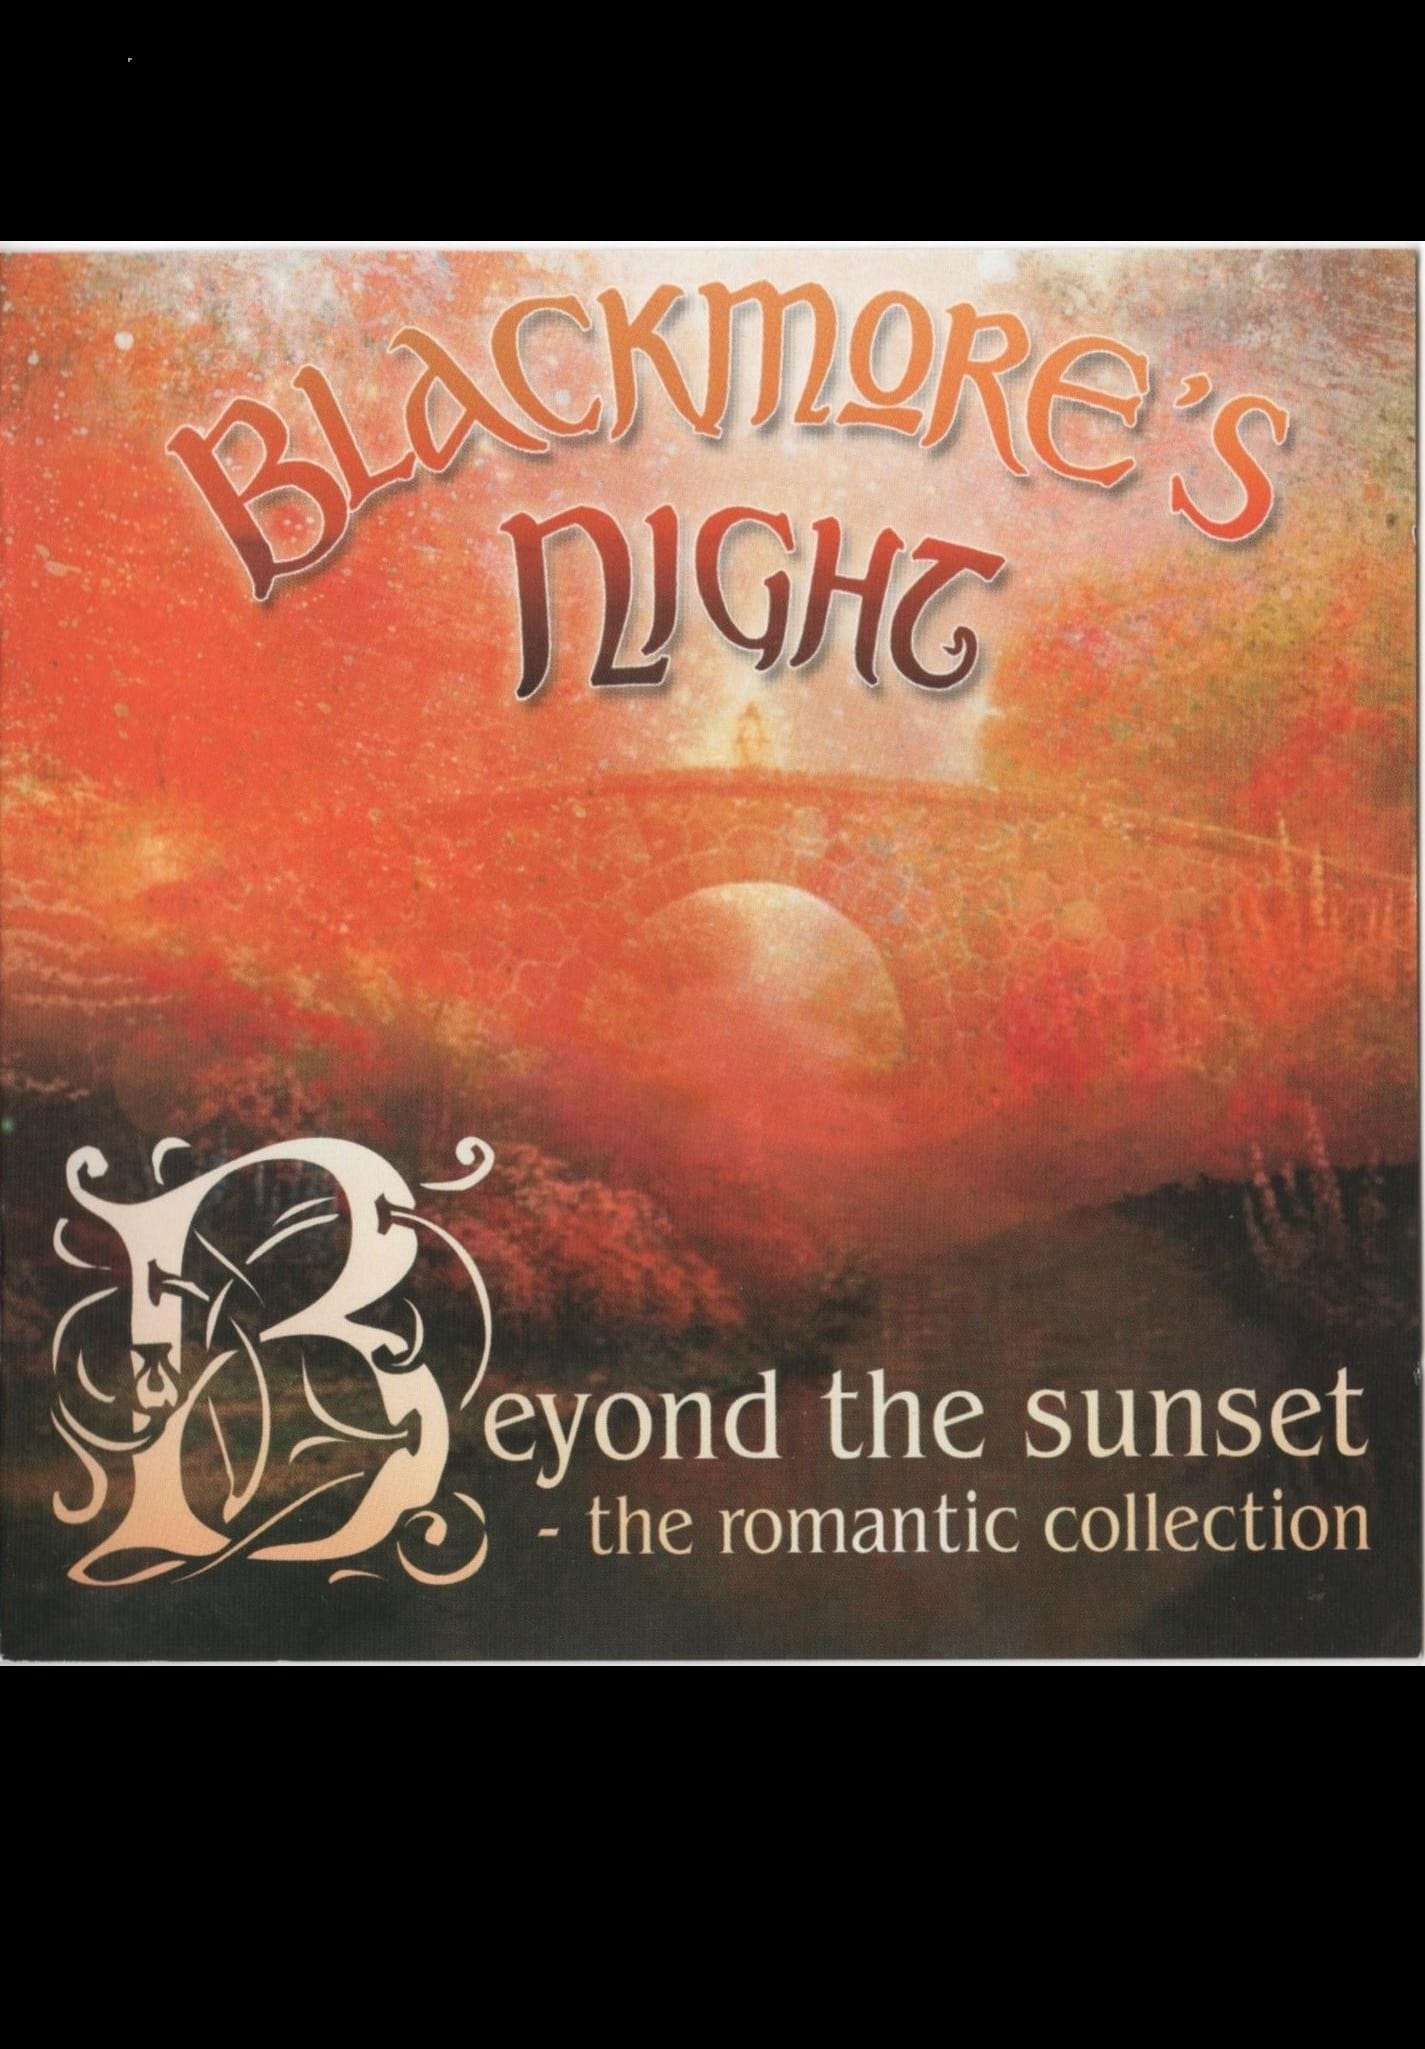 Blackmores Night: Beyond The Sunset